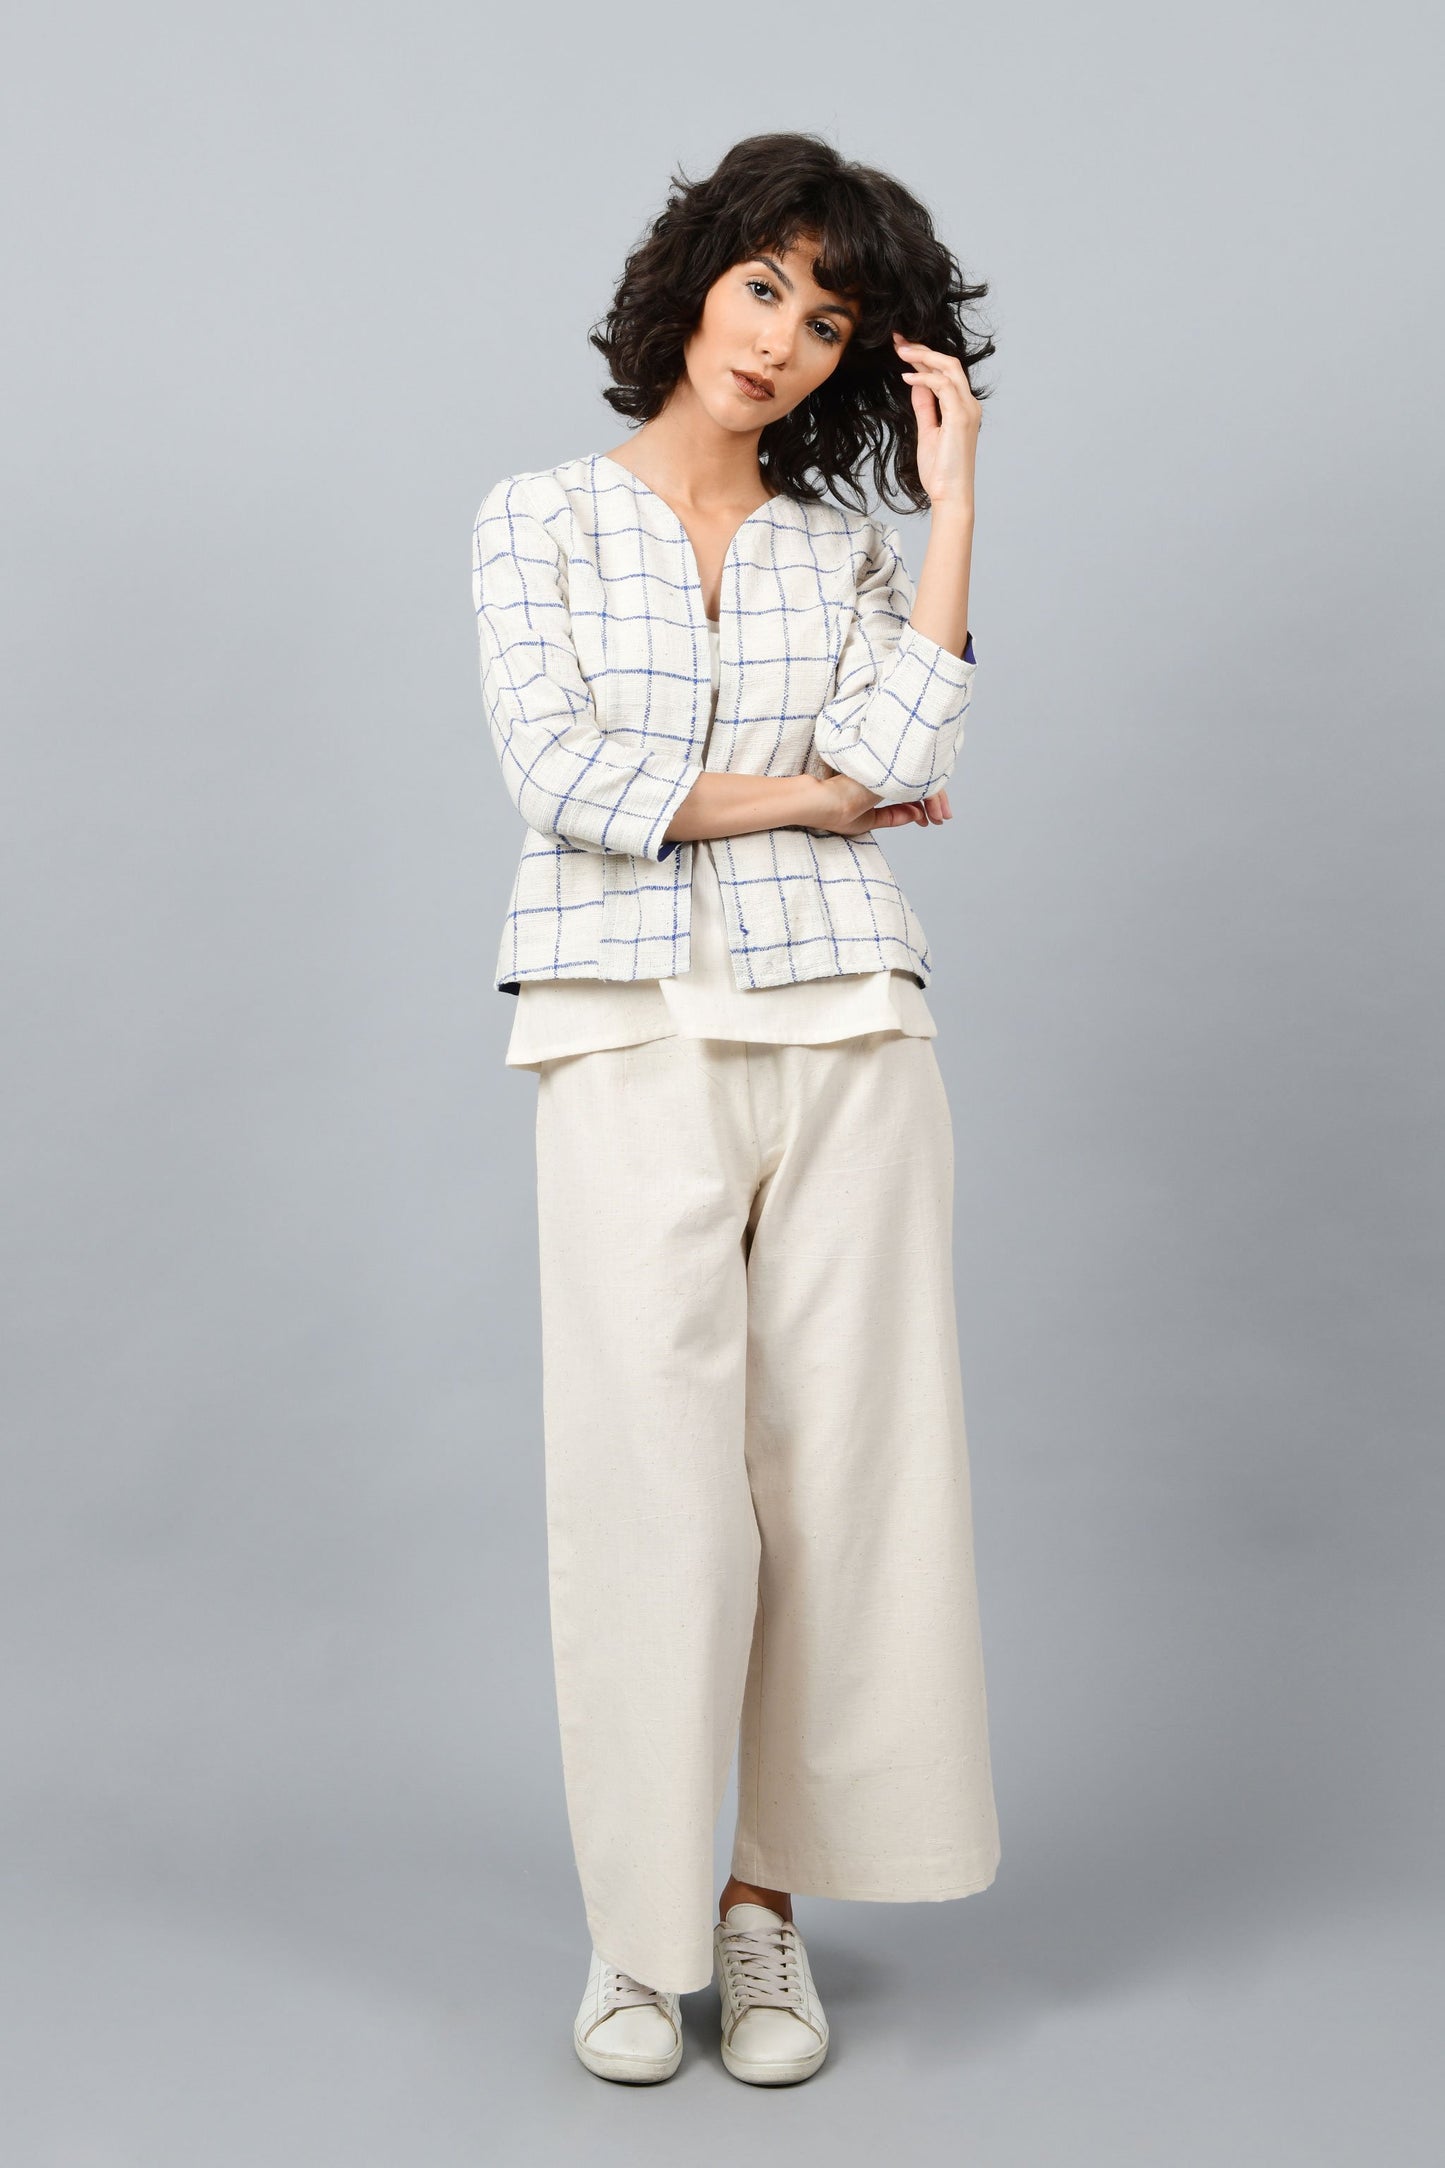 Brazilian Model posing for the camera wearing open short jacket in thicker white handspun and handwoven khadi cotton with big blue checks over off-white spaghetti top and off-white palazzos paired with white sneakers all made in India